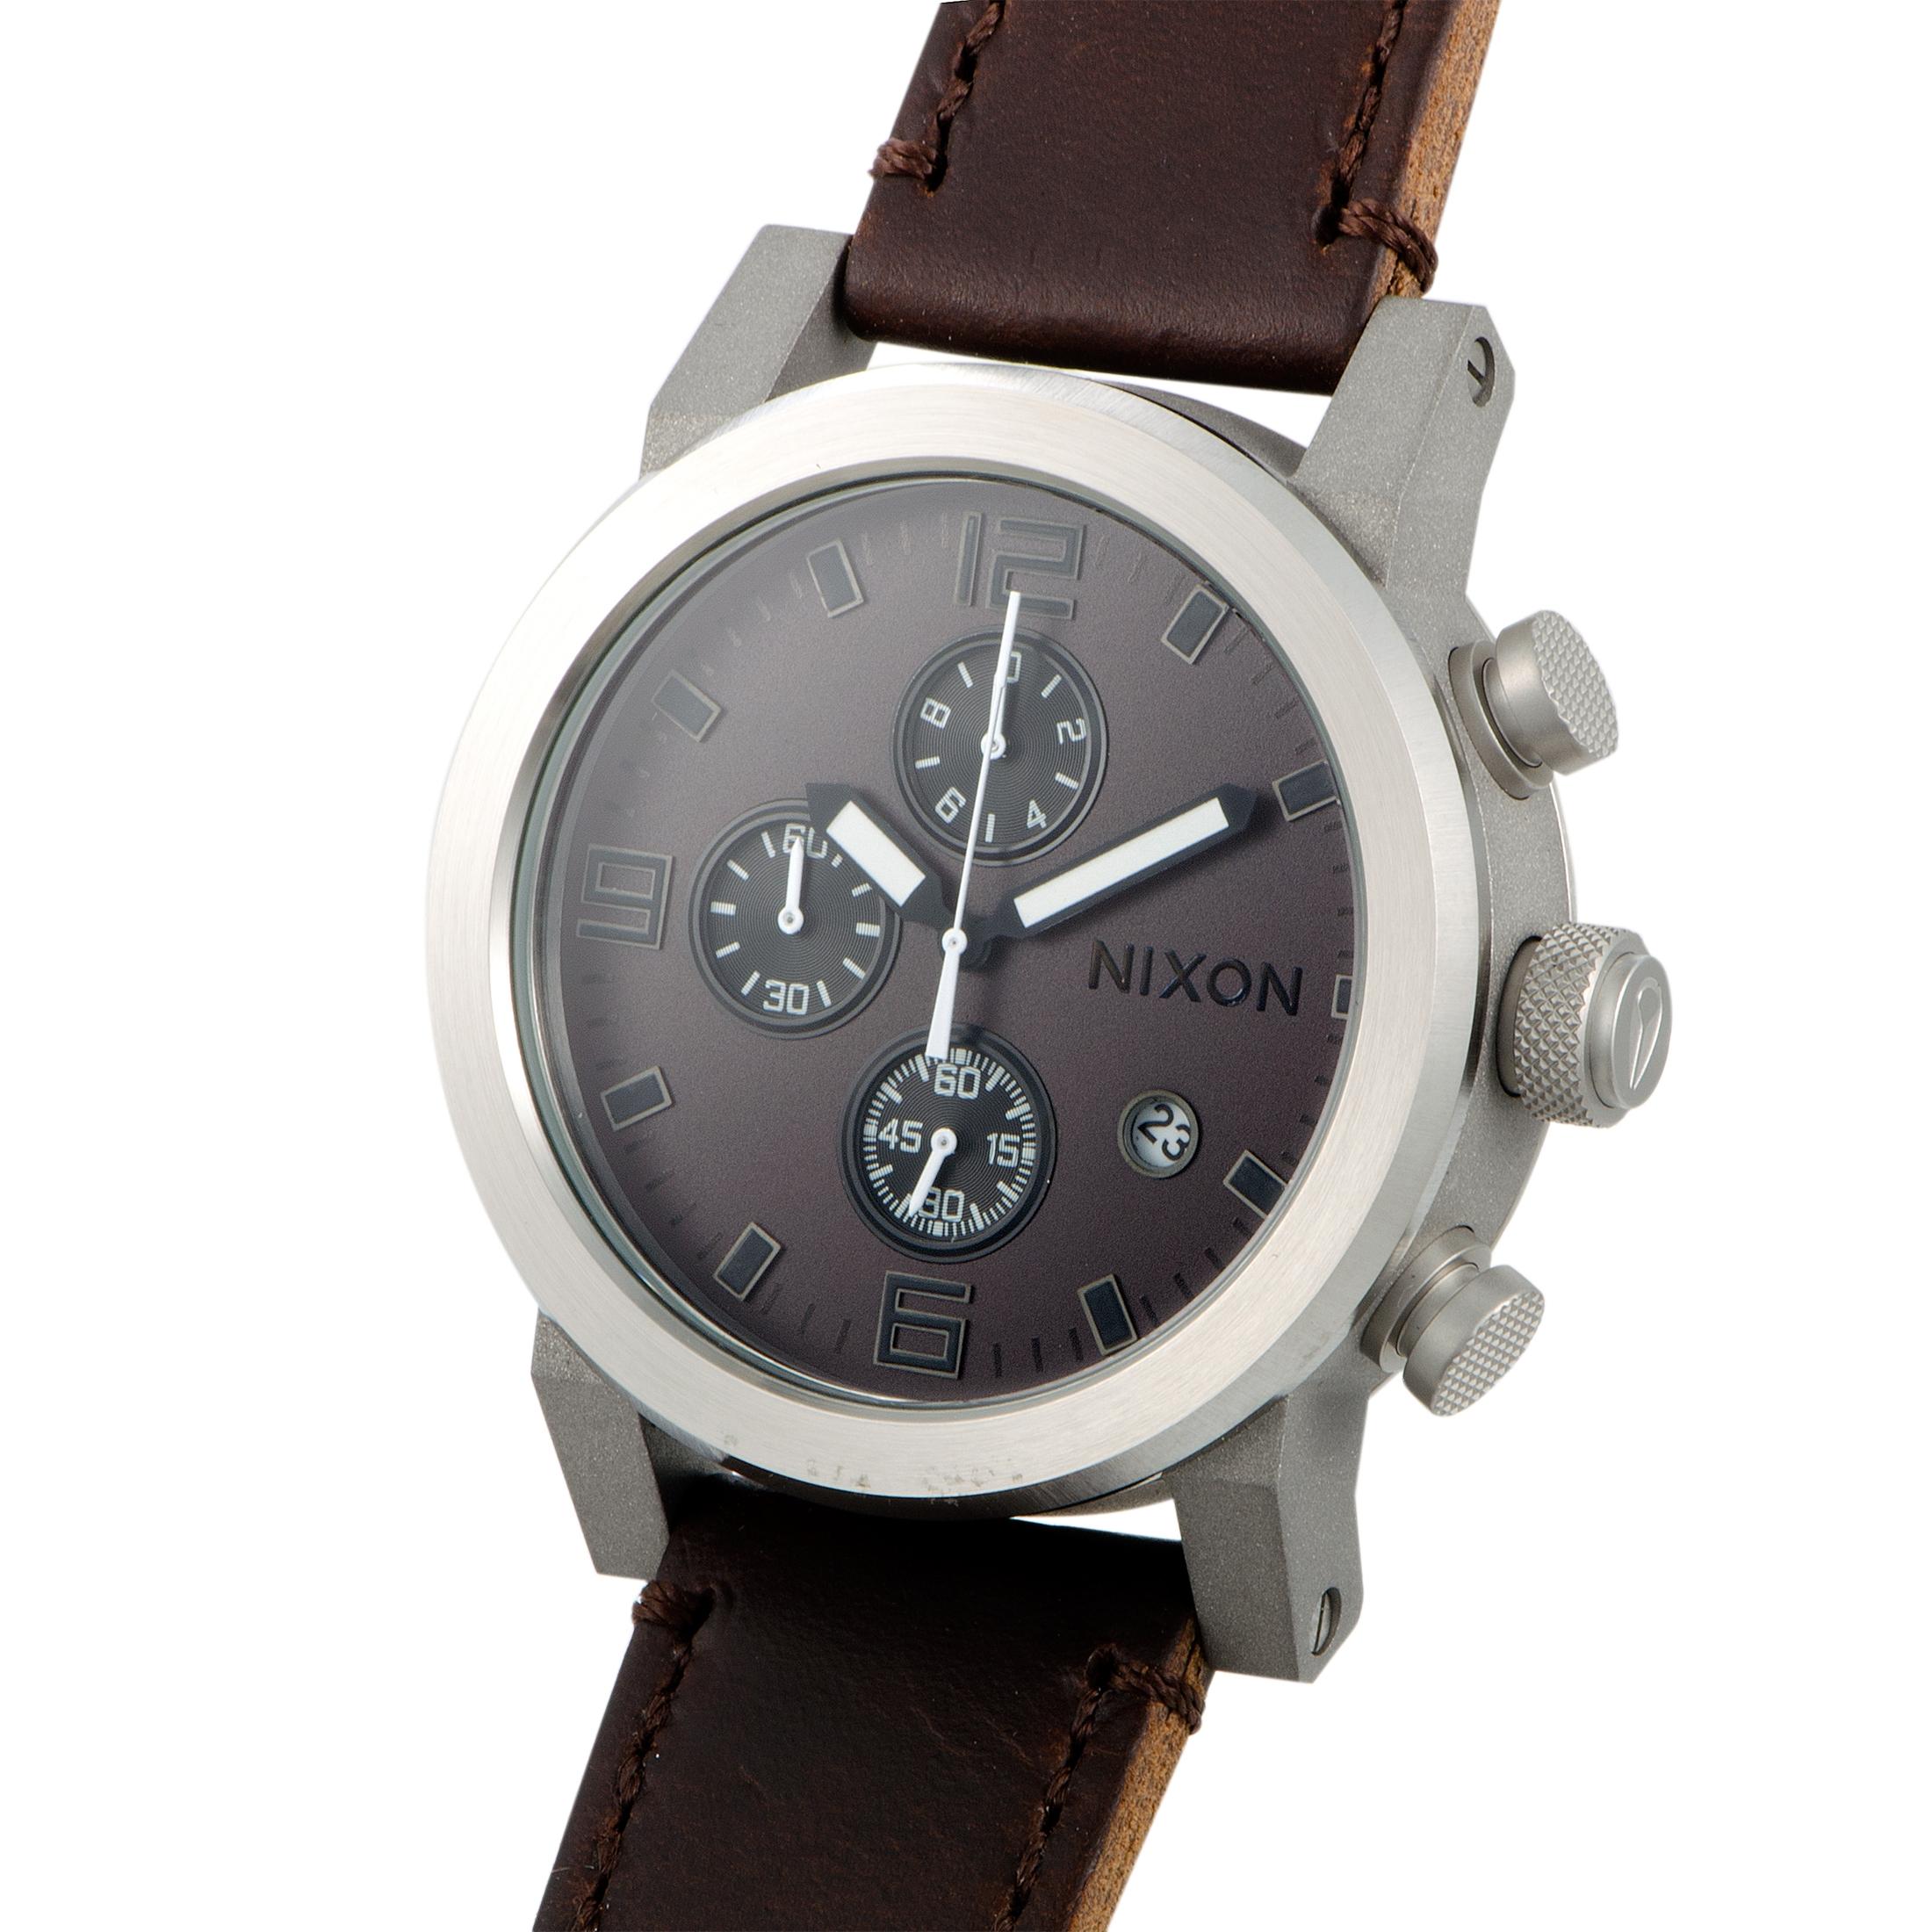 This is the Ride watch by Nixon, reference number A315-562-00.

Presented with a stainless steel case that is mounted onto a brown leather strap fitted with a tang buckle, this model offers water resistance of 100 meters. The brown dial with Arabic